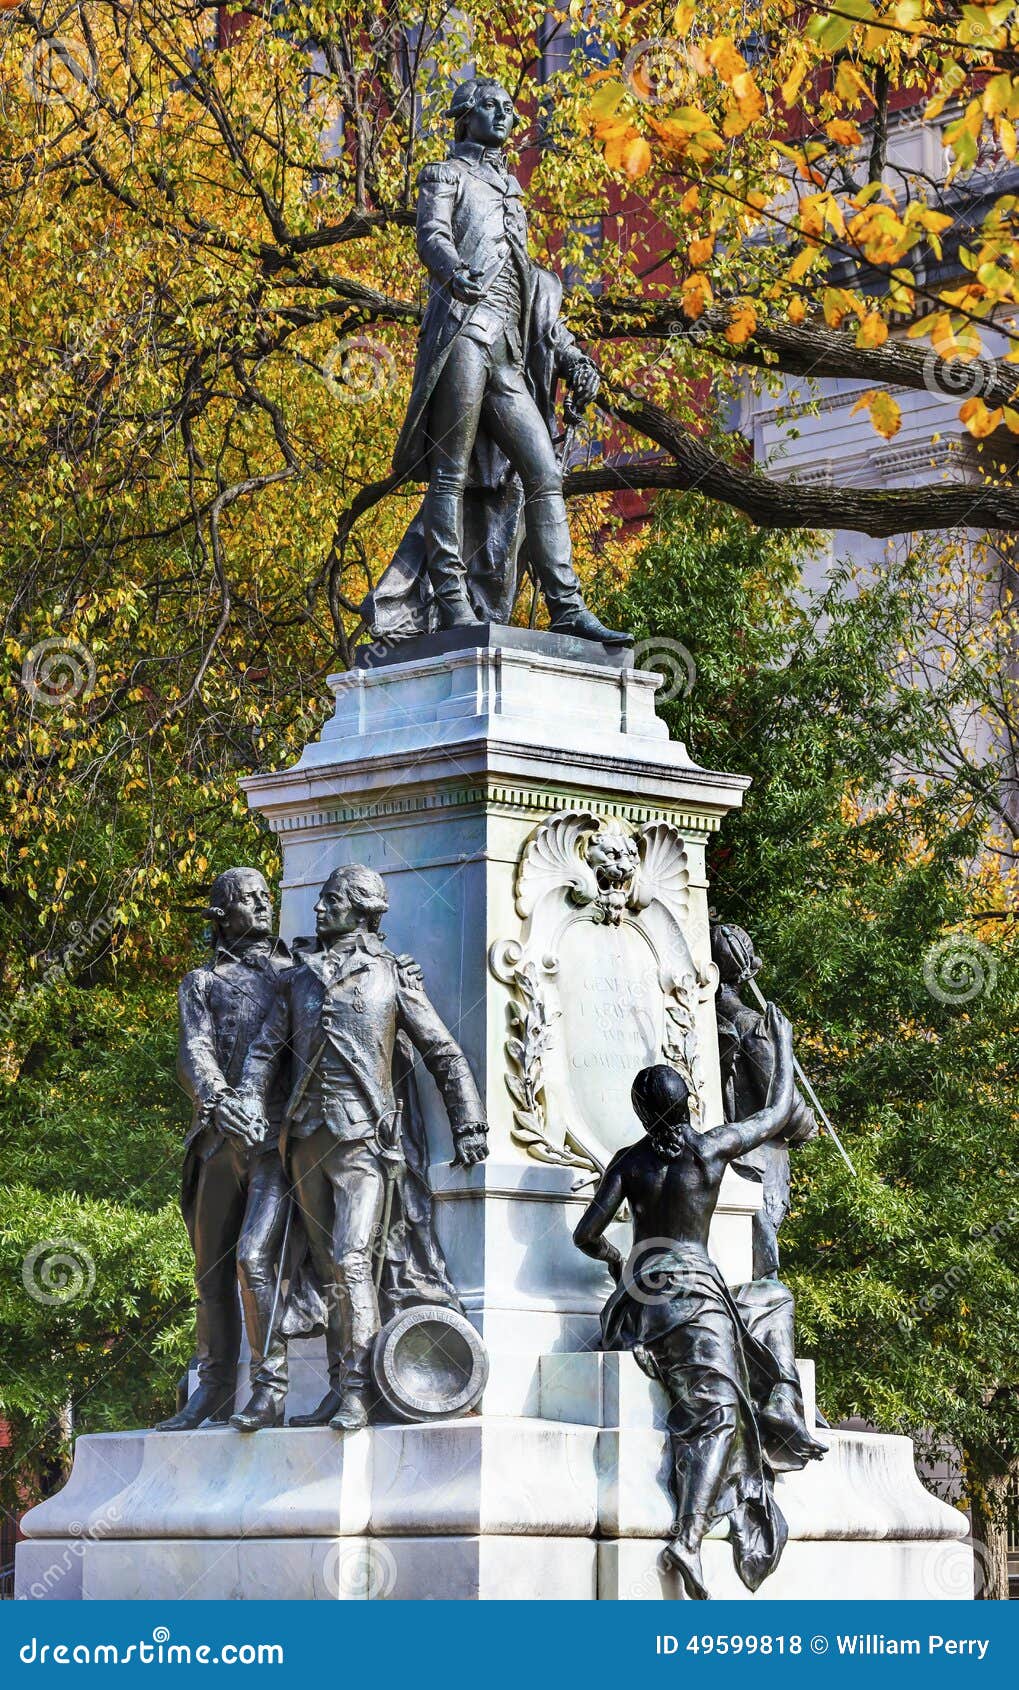 General Lafayette Statue Lafayette Park Autumn Washington DC. General Marquis de Lafayette Statue Lafayette Park Autumn Washington DC. In American Revolution General Lafayette was an officer in the American Revolution and personal friend of General Washington. Statue was dedicated in 1891 as a reaffirmation of French American relations. Artist Sculptor Jean Falguiere.